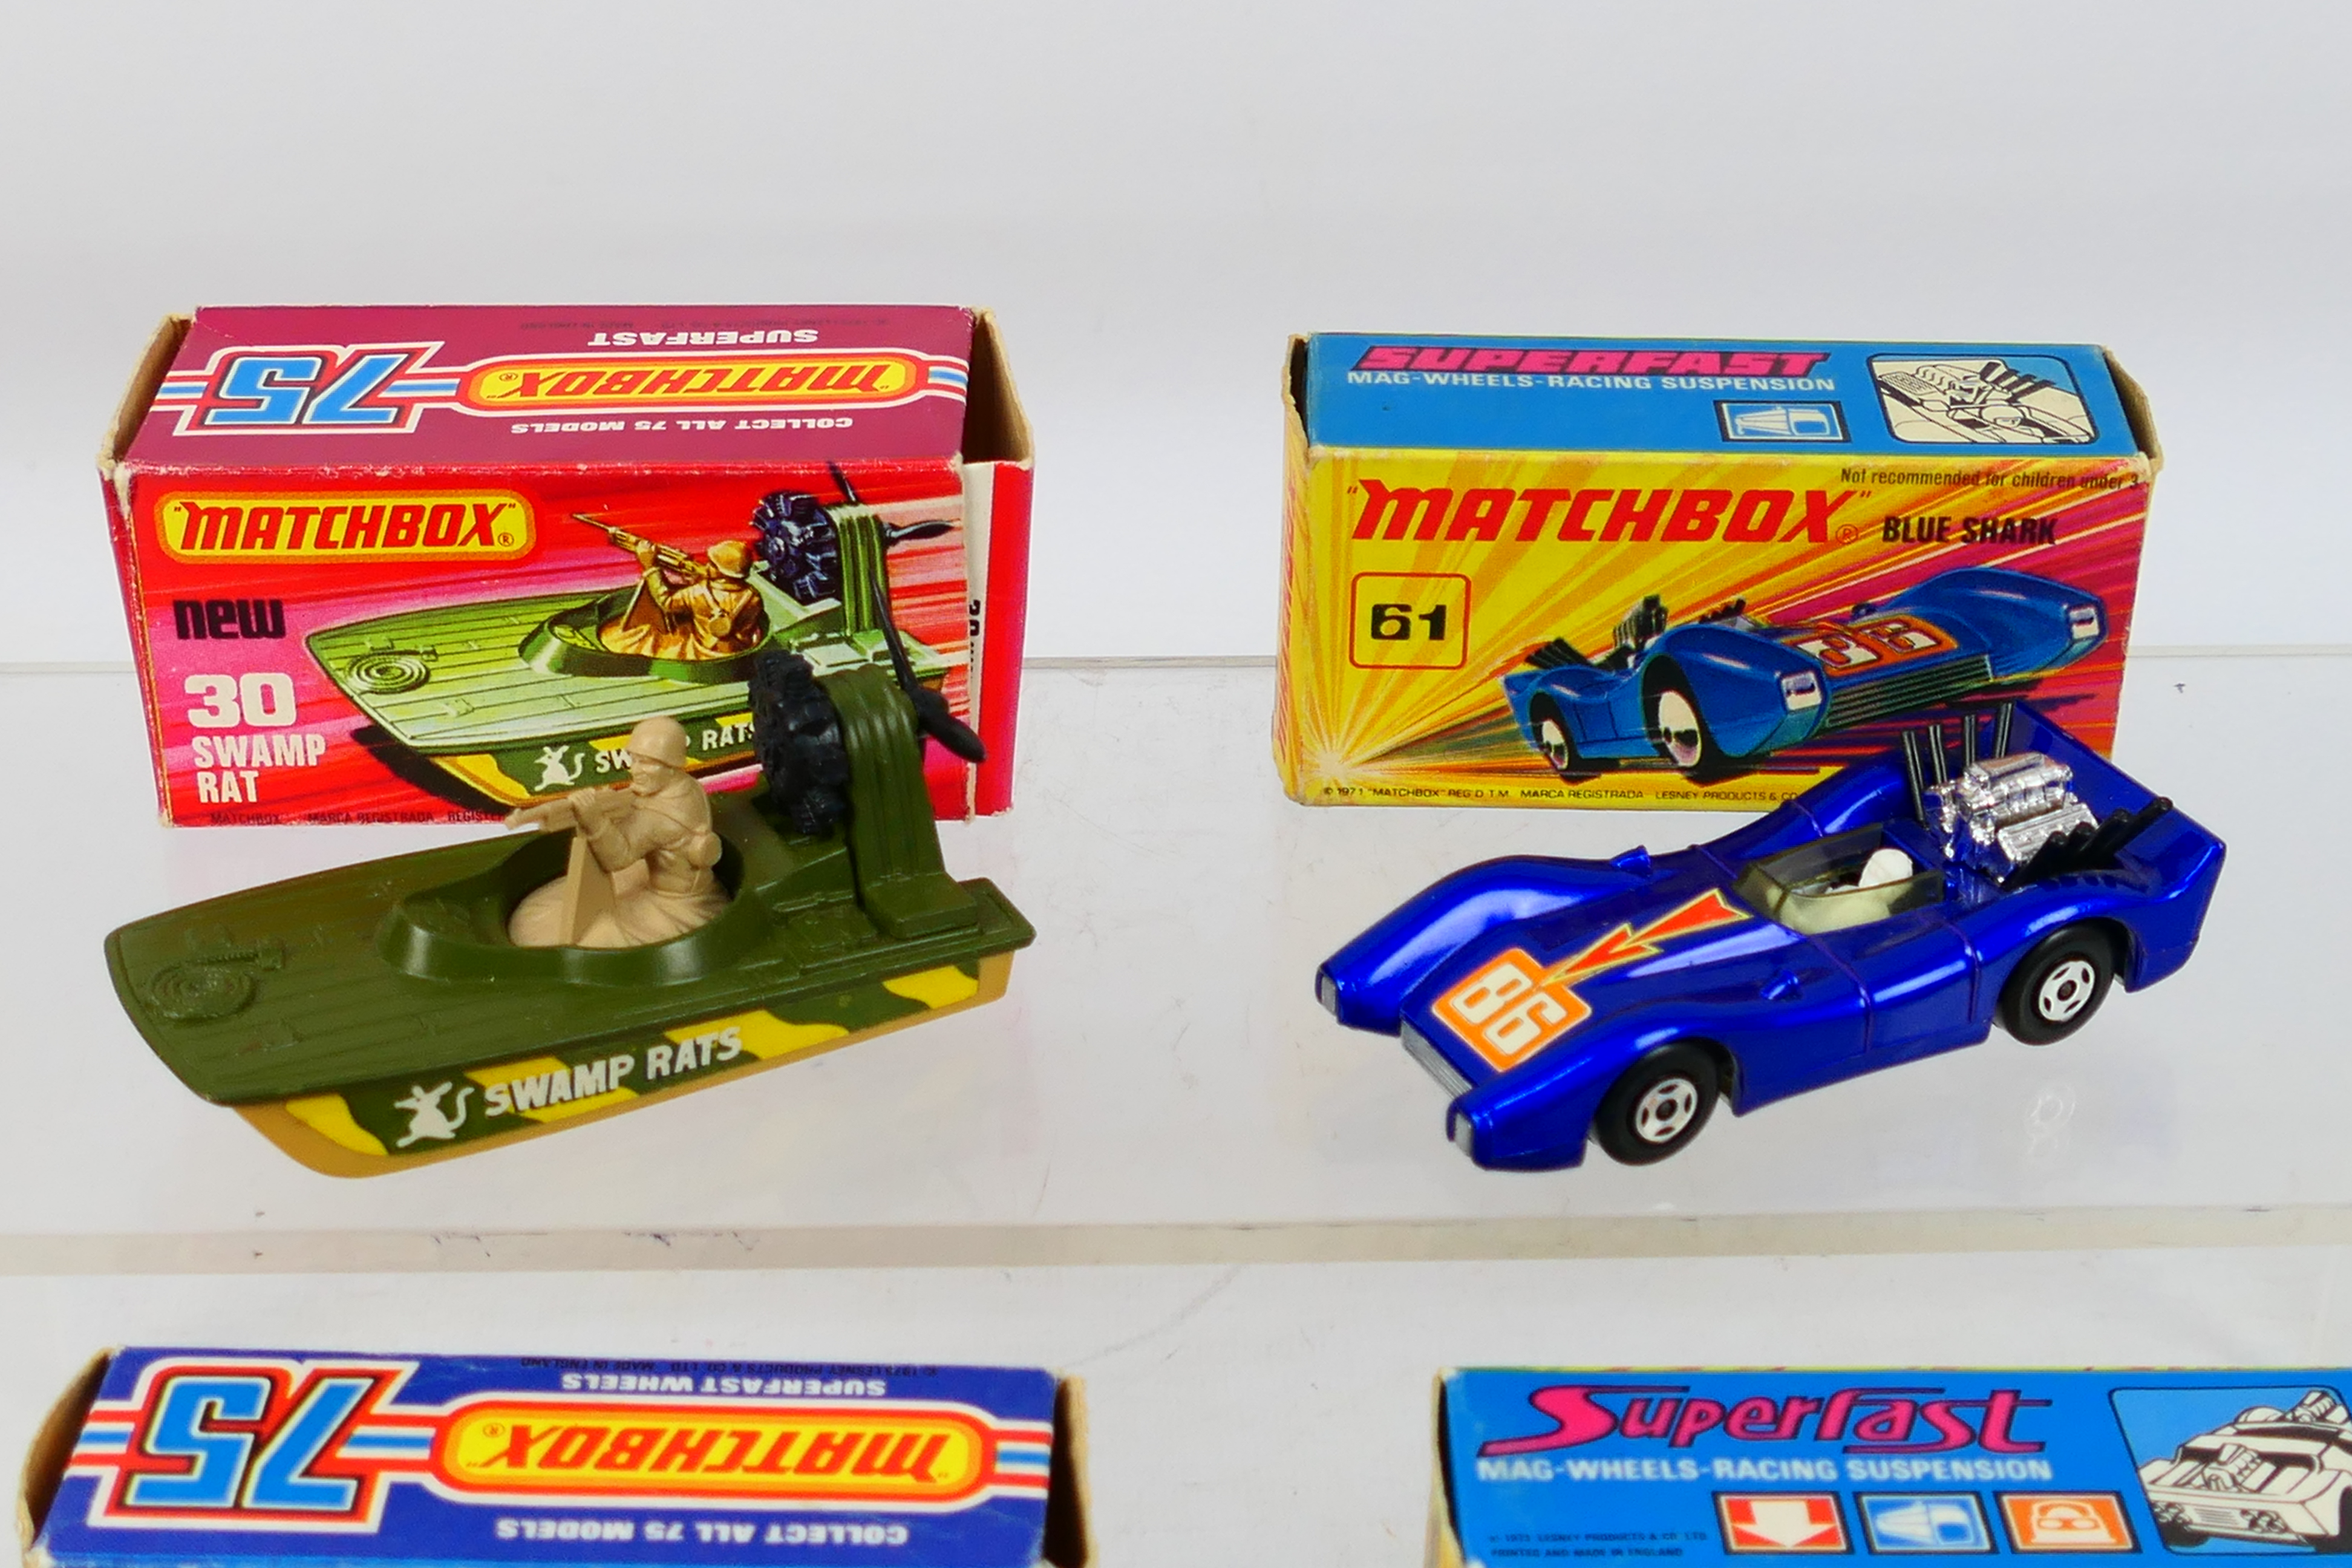 Matchbox - Superfast - 4 x boxed models, Rescue Hovercraft # 2, Gruesome Twosome # 4, - Image 2 of 6